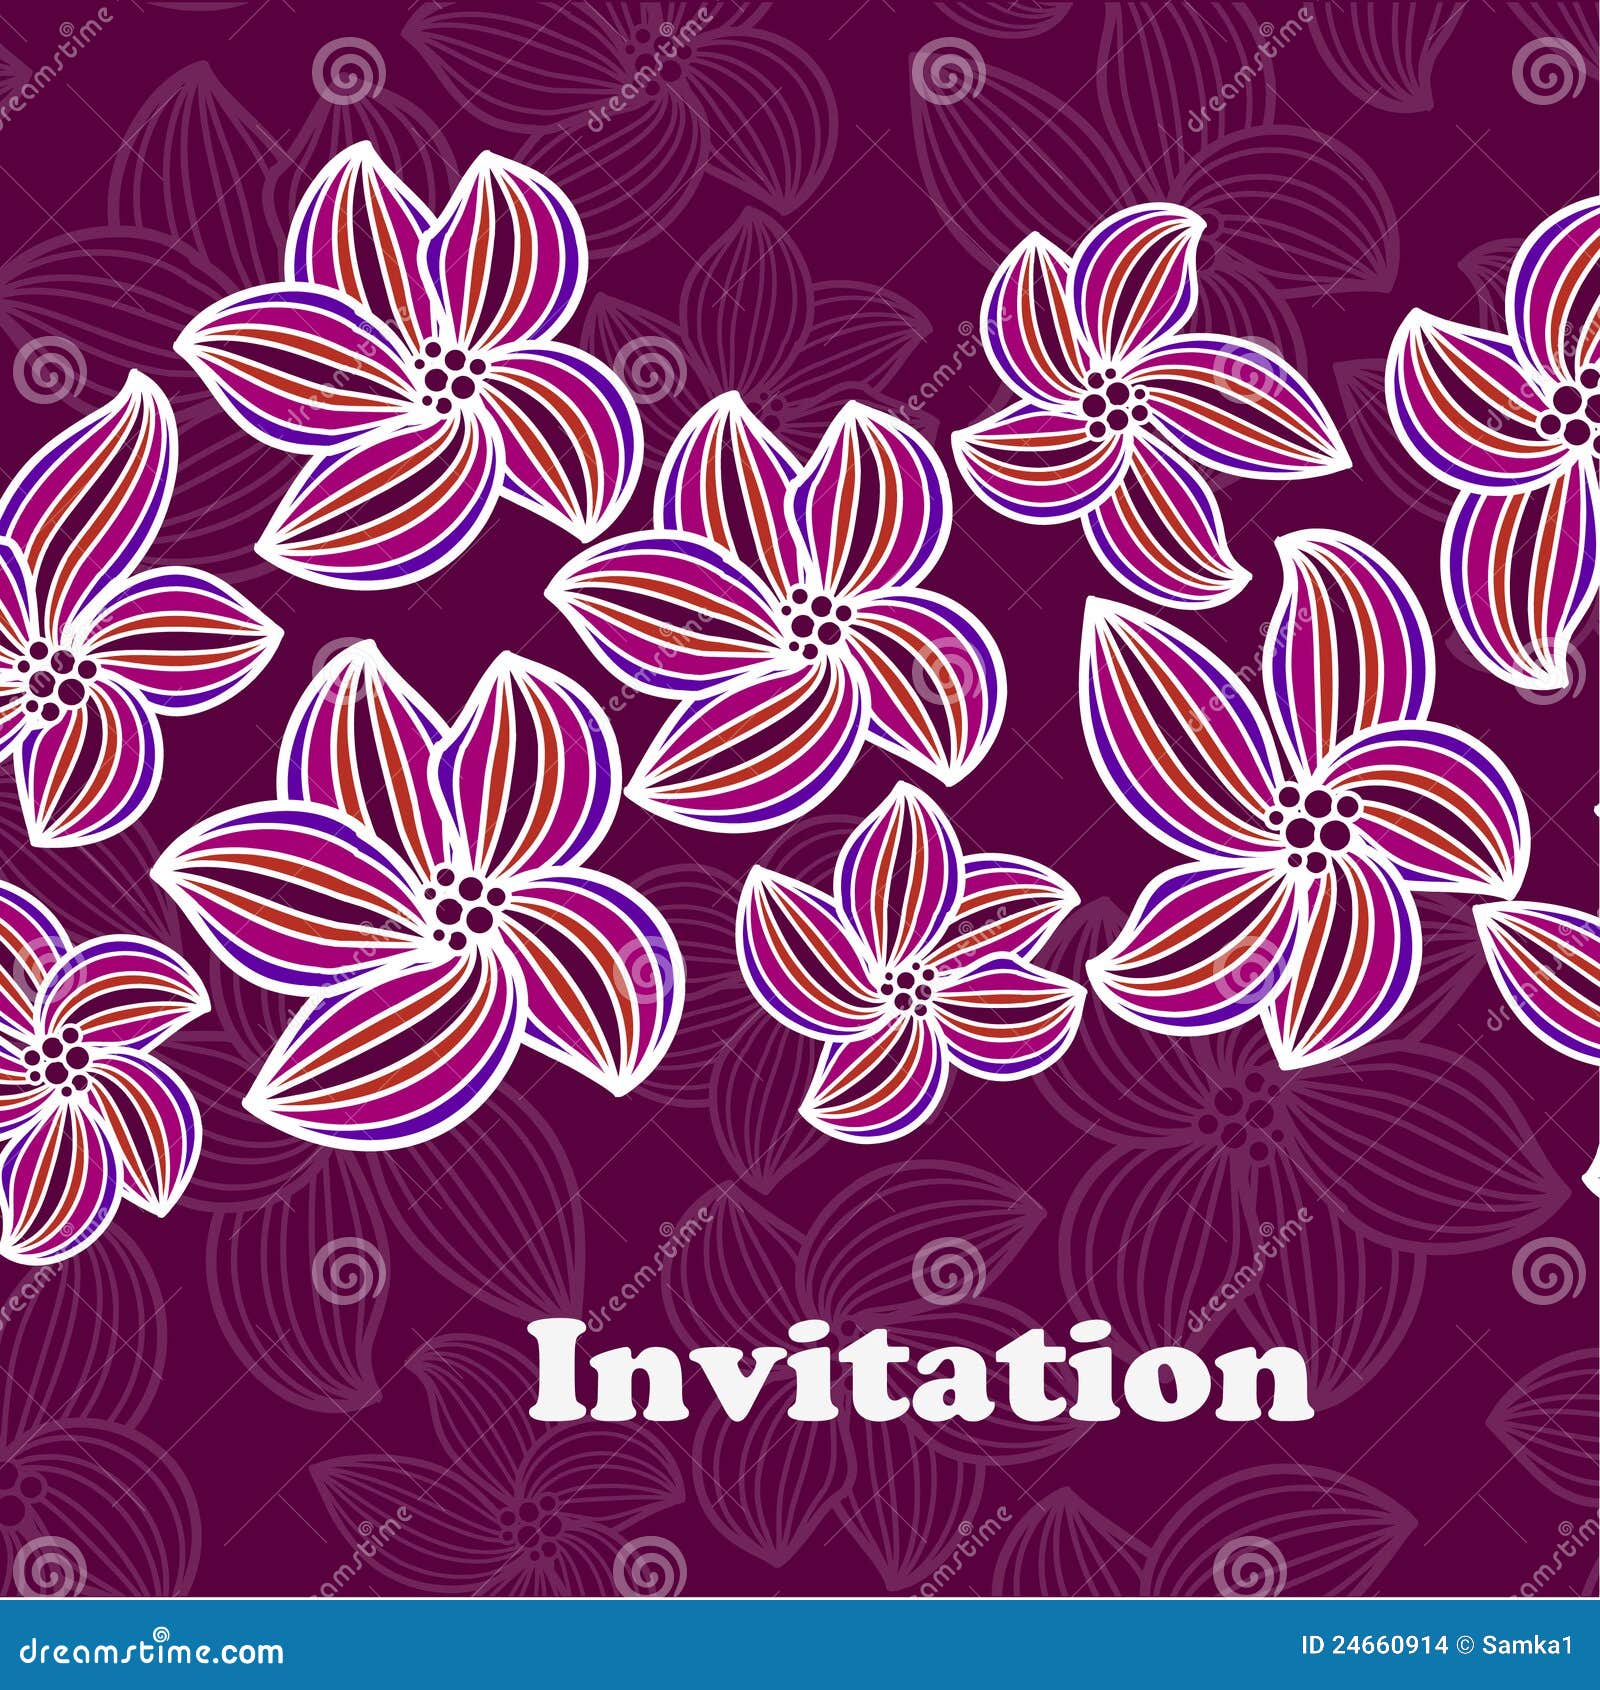 wedding card or invitation with abstract floral ba